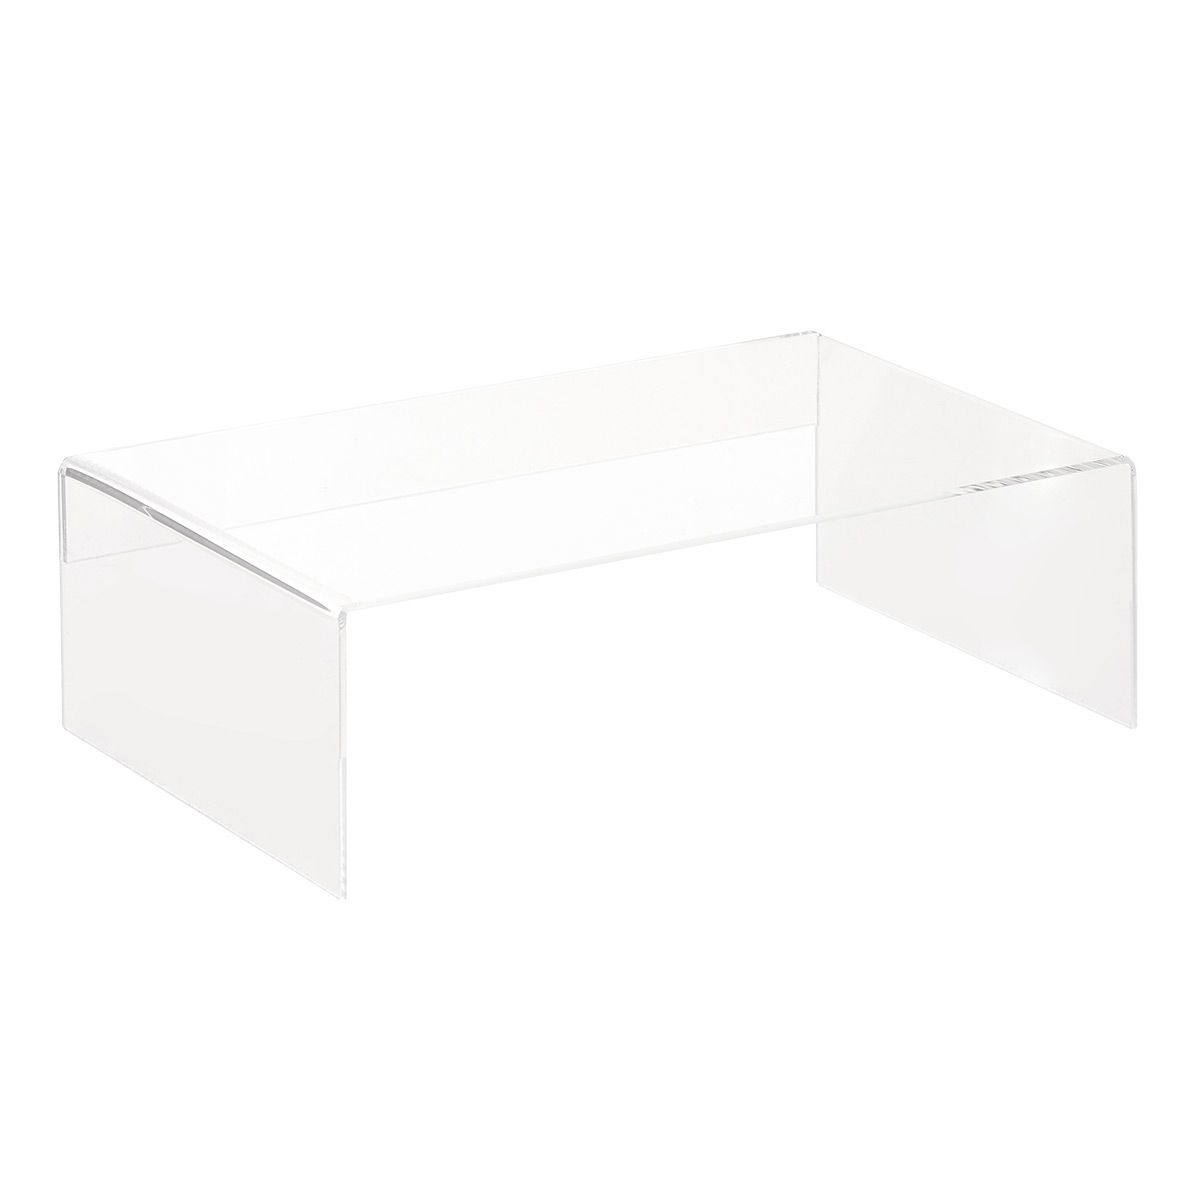 Acrylic Organizer Shelves | The Container Store